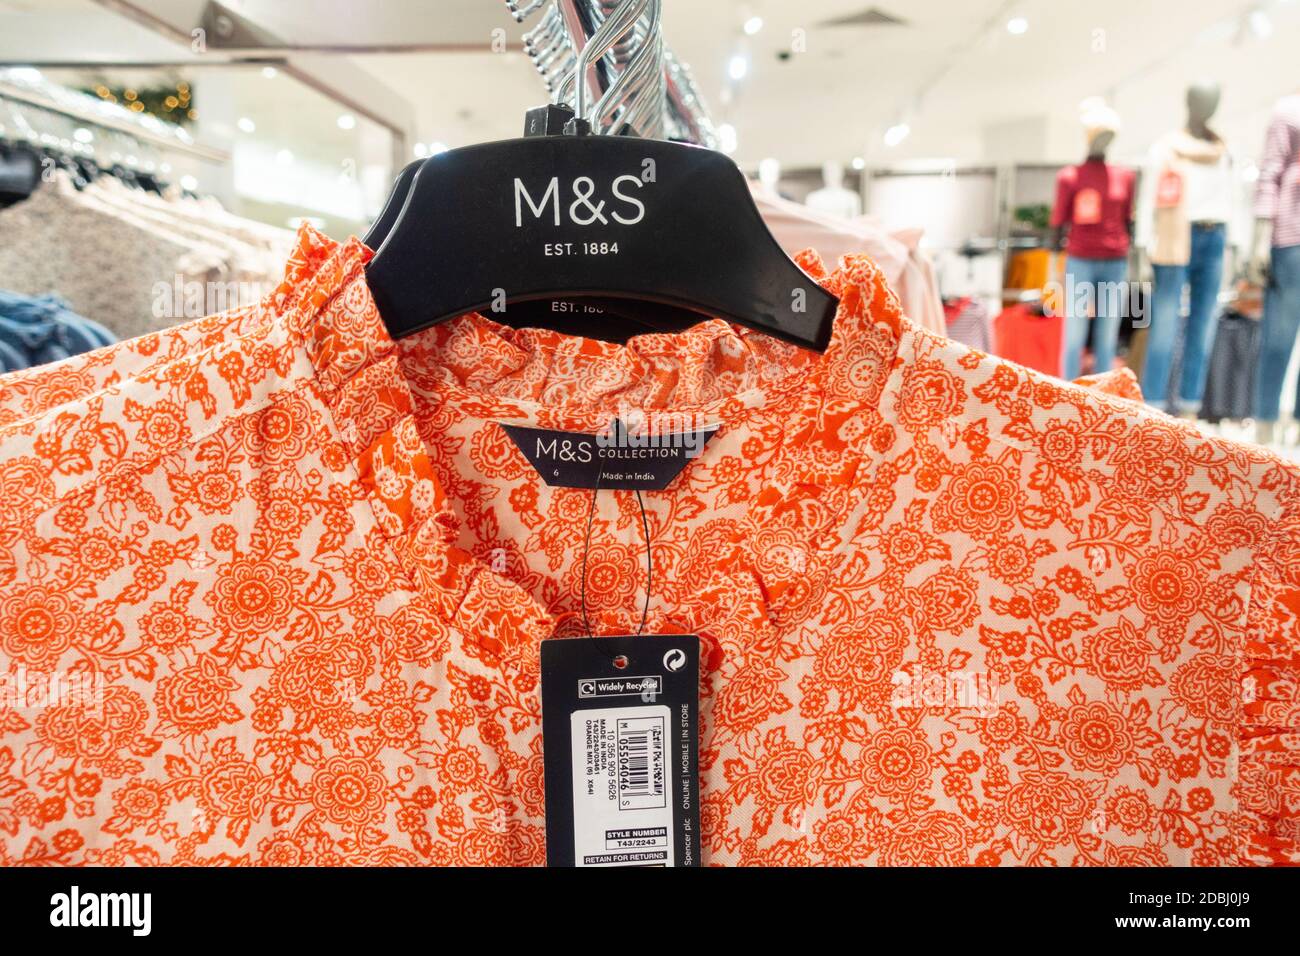 Womens clothing with Made in India label in M&S Marks and Spencer store, England. UK Stock Photo